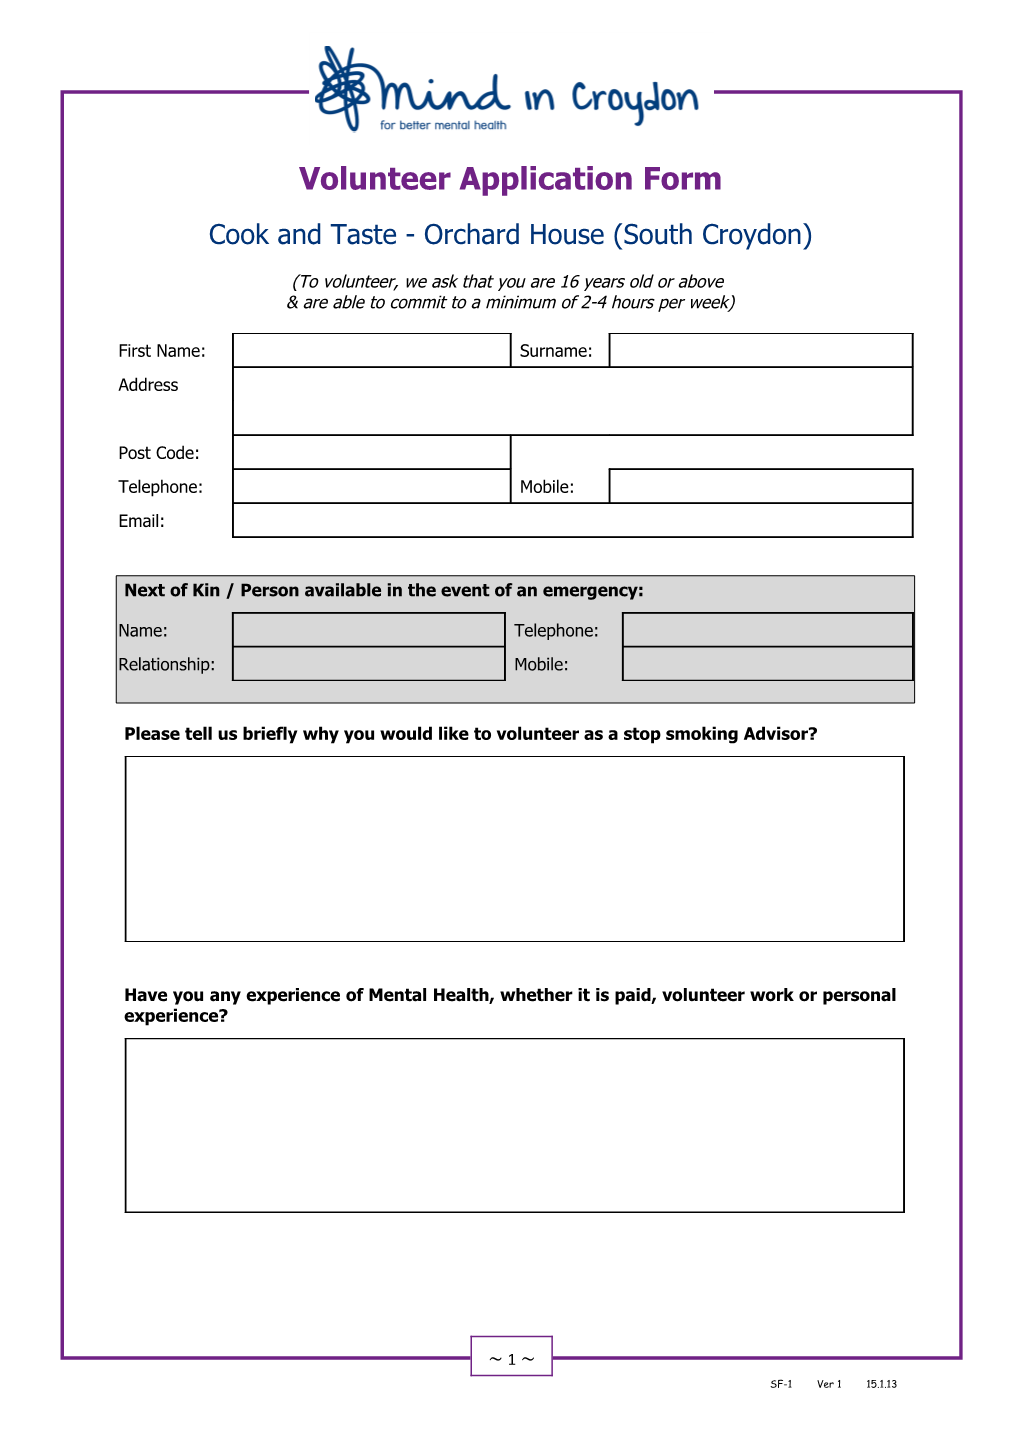 Cook and Taste - Orchard House (South Croydon)